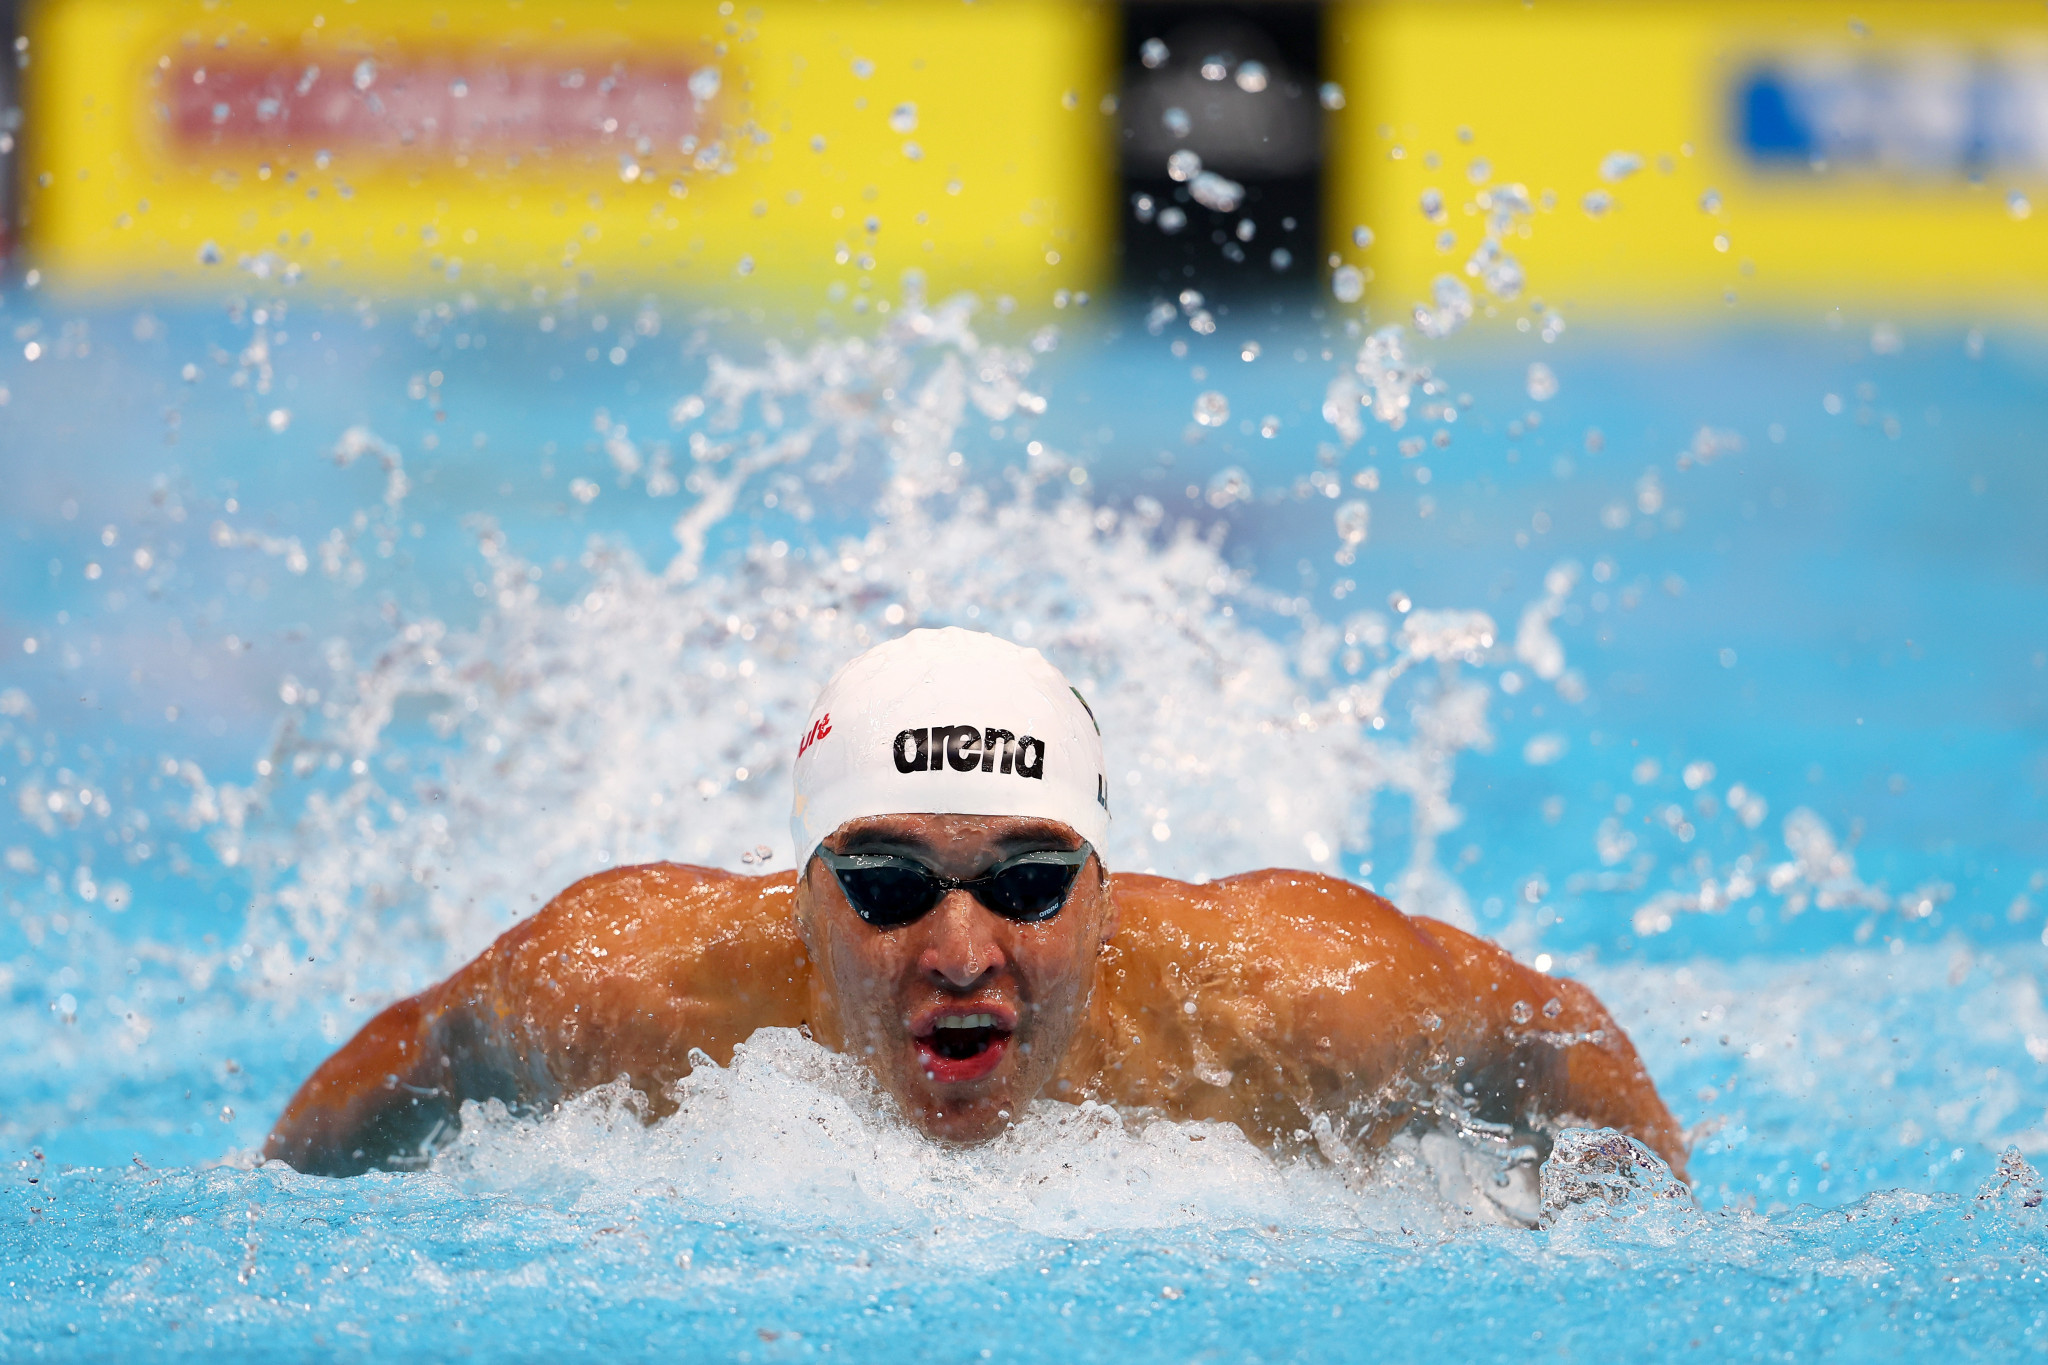 Chad Le Clos could become the most decorated Commonwealth Games athlete in history if he wins two medals in Birmingham ©Getty Images